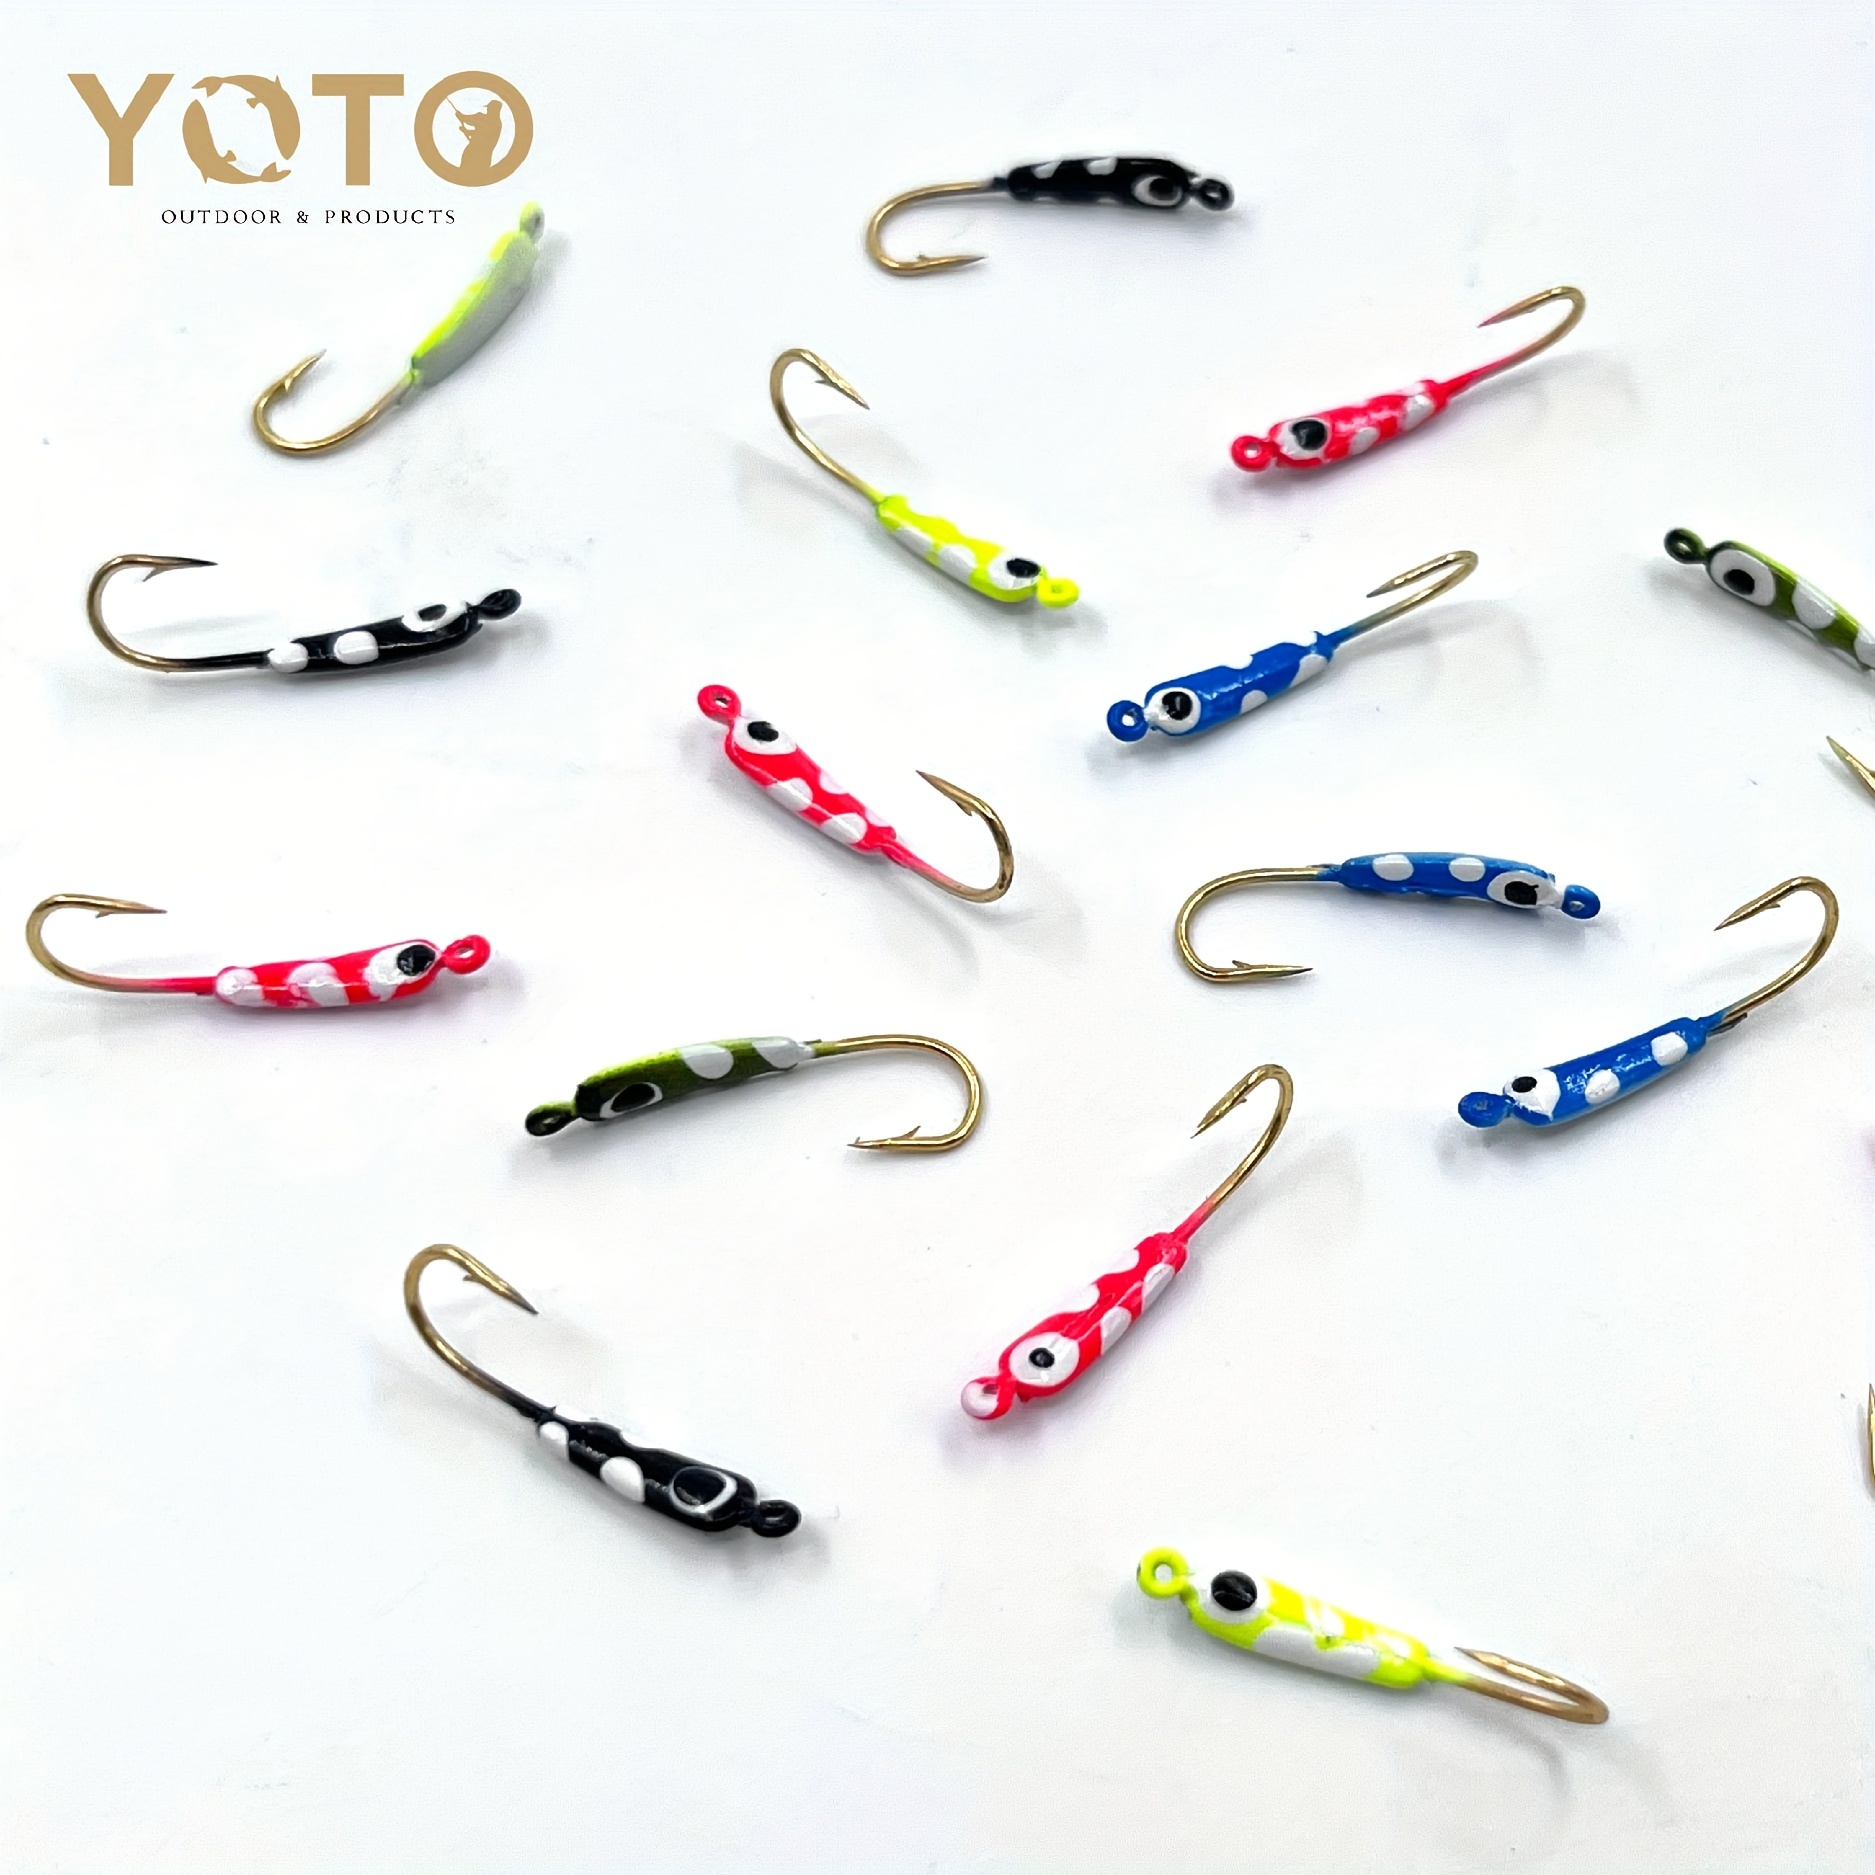 * 10pcs/20pcs Glow Ice Fishing Rigs, Winter Artificial Colorful Lead Head  Bait Hooks, Fishing Accessories